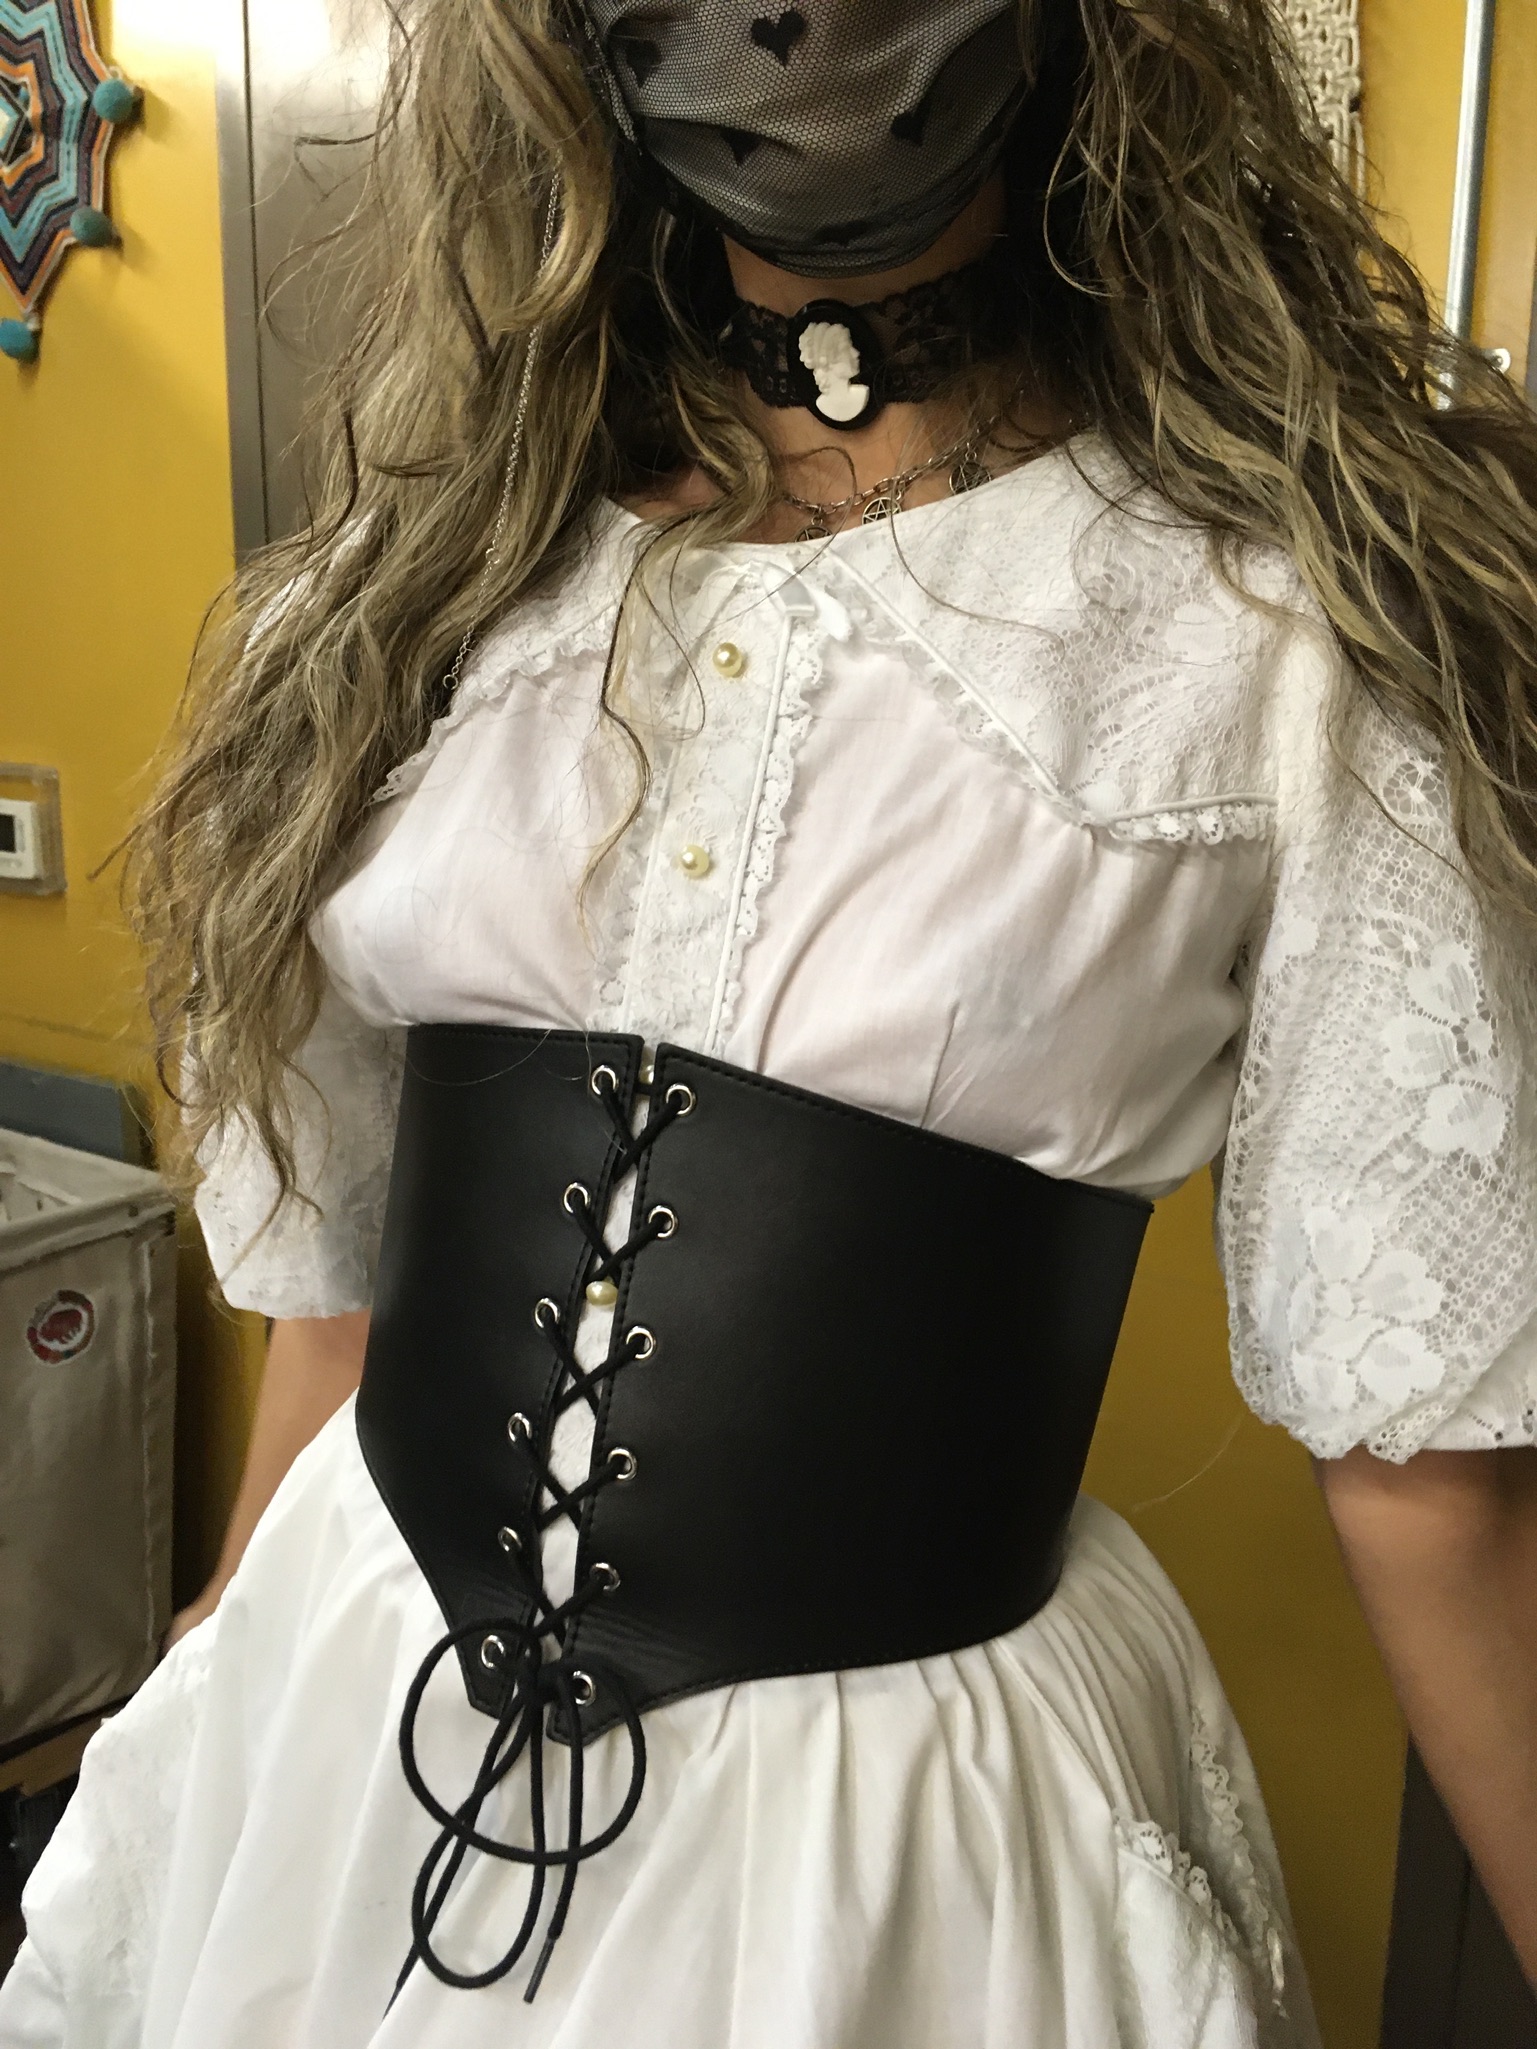 Person wearing black corset over white, Victorian-inspired dress